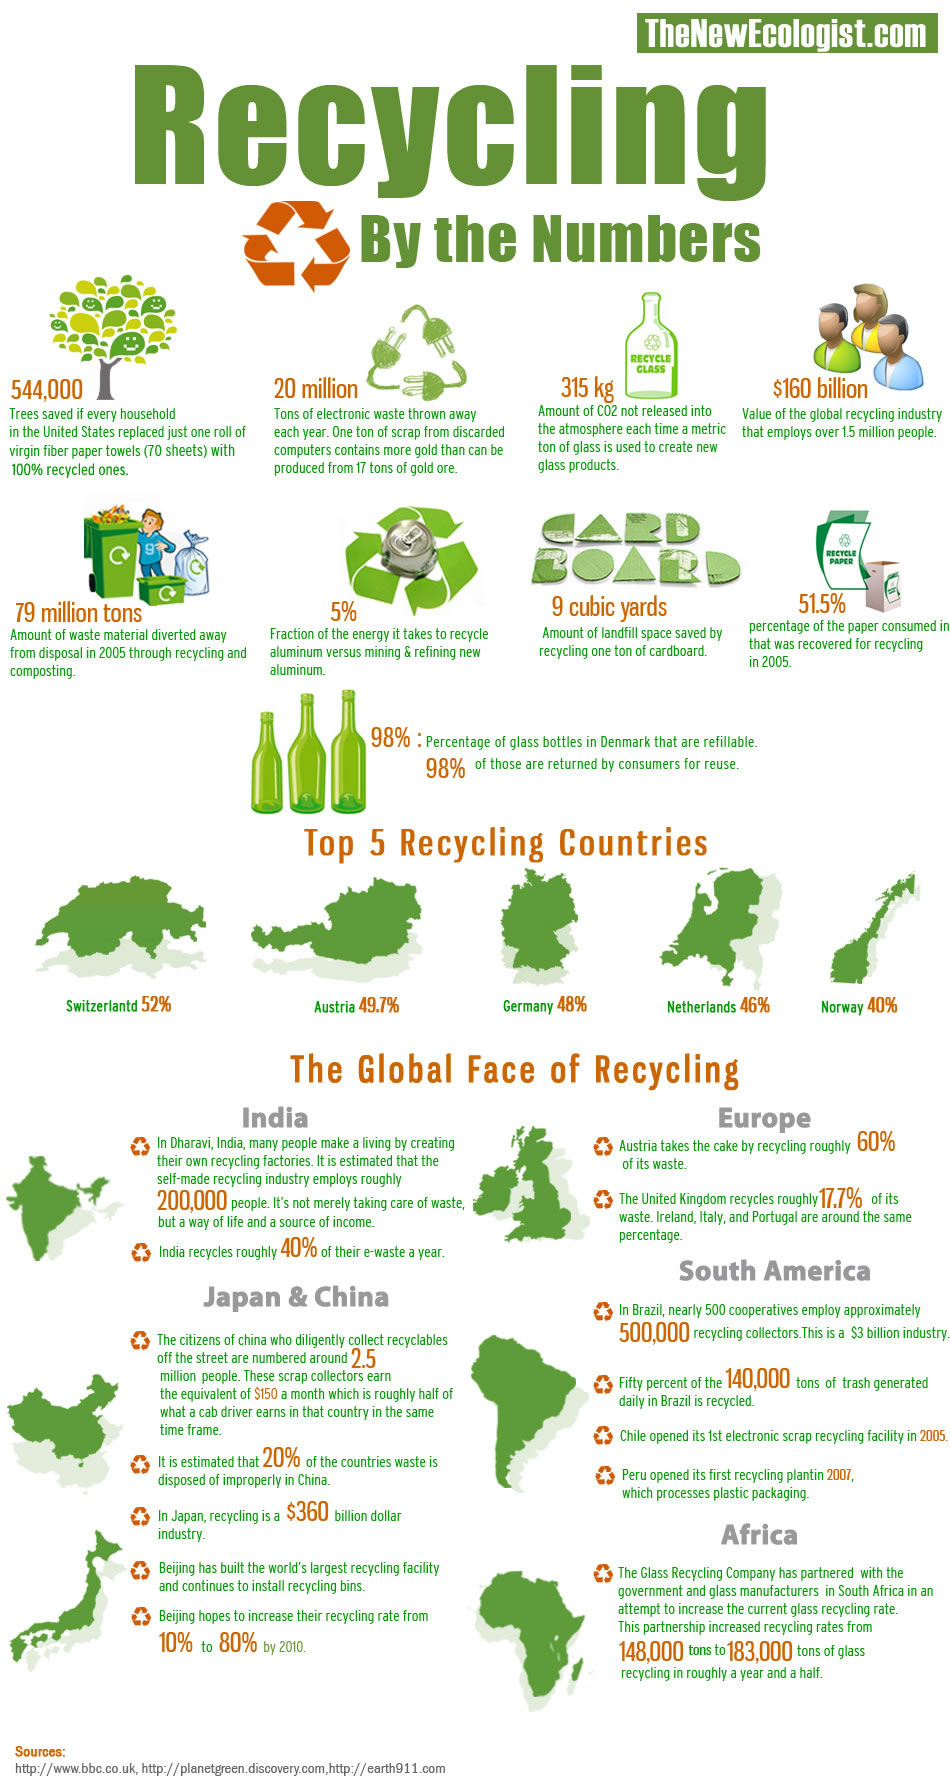 Recycling is preparing utilized materials (waste) into revamped items to forestall waste of possibly convenient materials, decrease the depletion of crisp crude materials, decrease force regulation, lessen air contamination (from […]